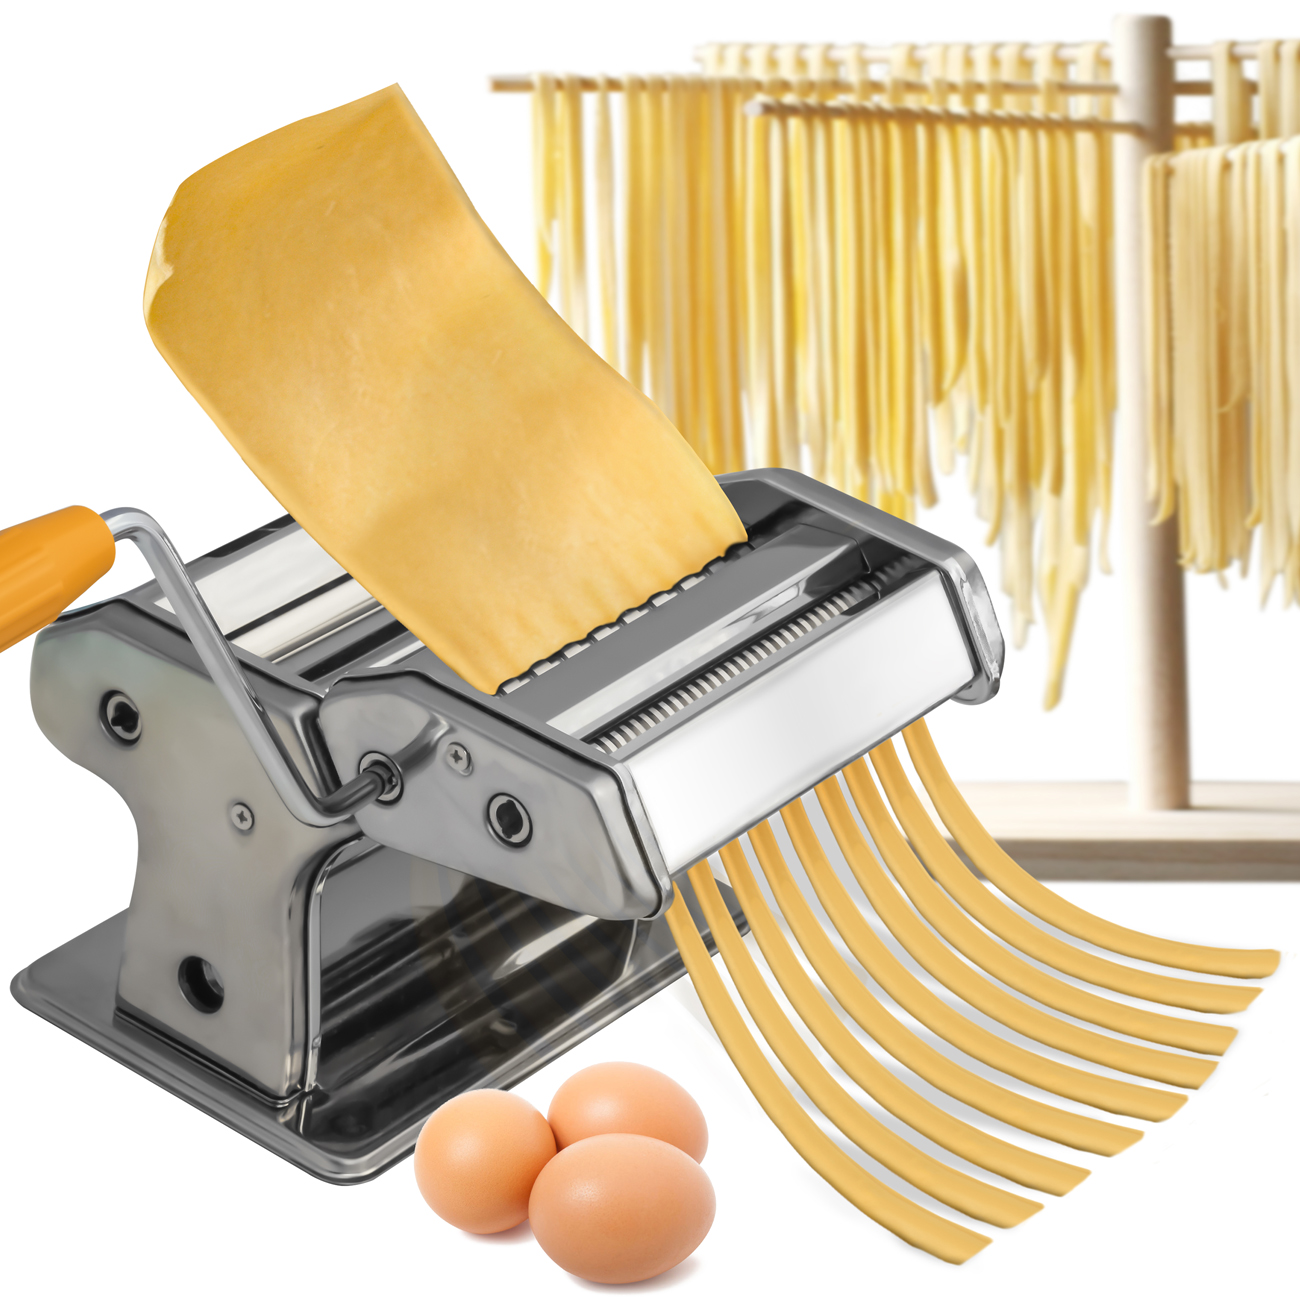 Ktaxon Pasta Machine, Roller Pasta Maker, Adjustable Thickness Settings Noodles Maker with Washable Rollers and Cutter,Perfect for Spaghetti, Fettuccini, Lasagna or Dumpling Skins - image 2 of 8